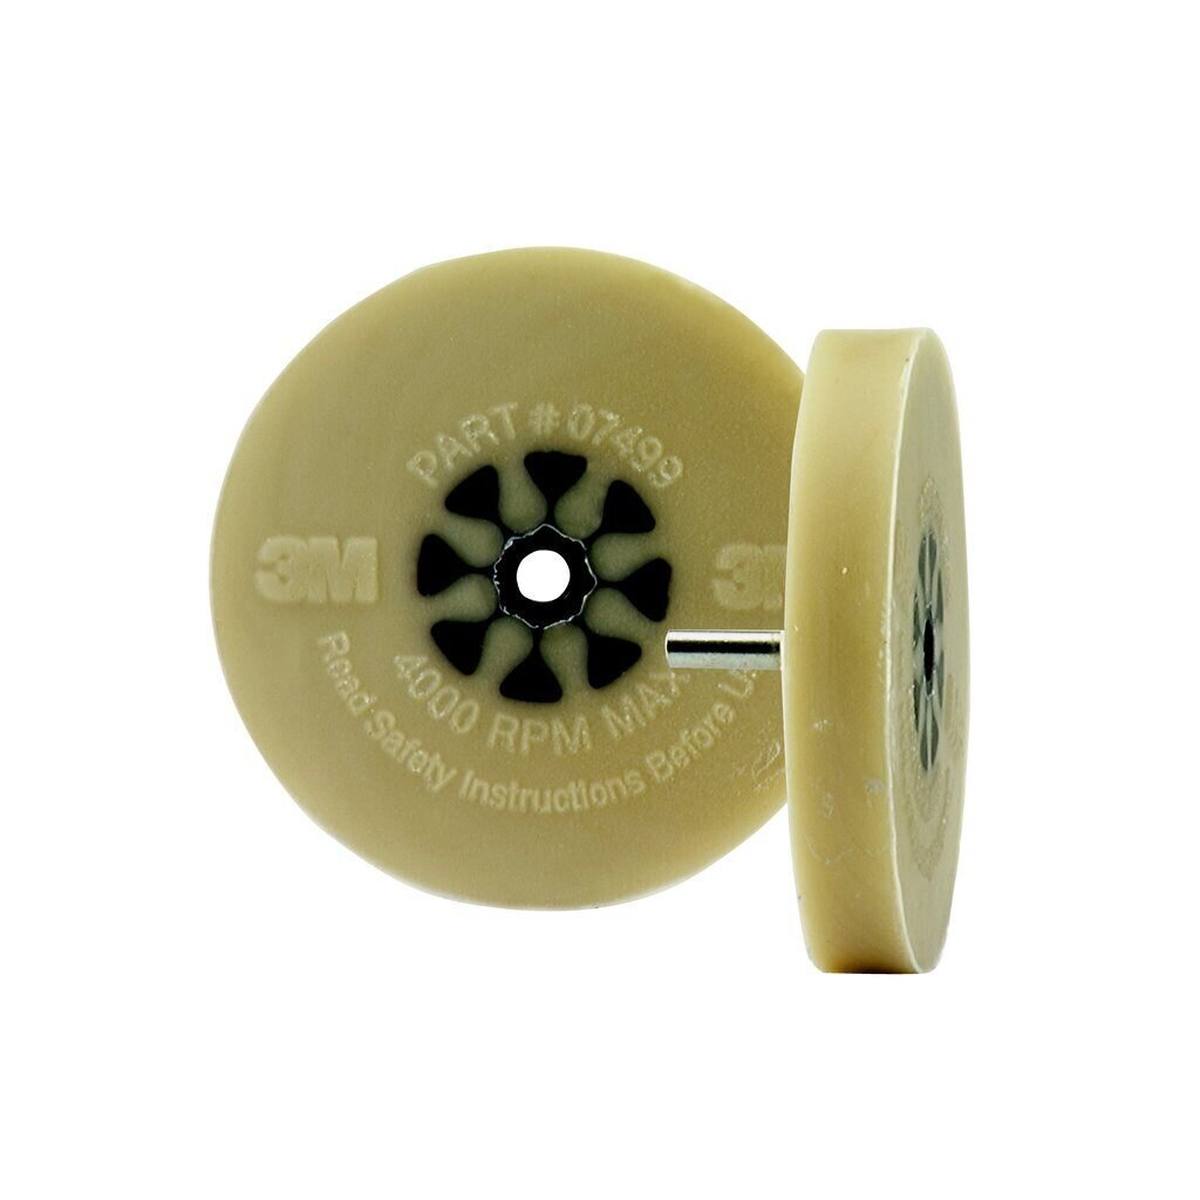 3M Scotch-Brite Radial disc with mounting shaft, 101.2mm, 07498